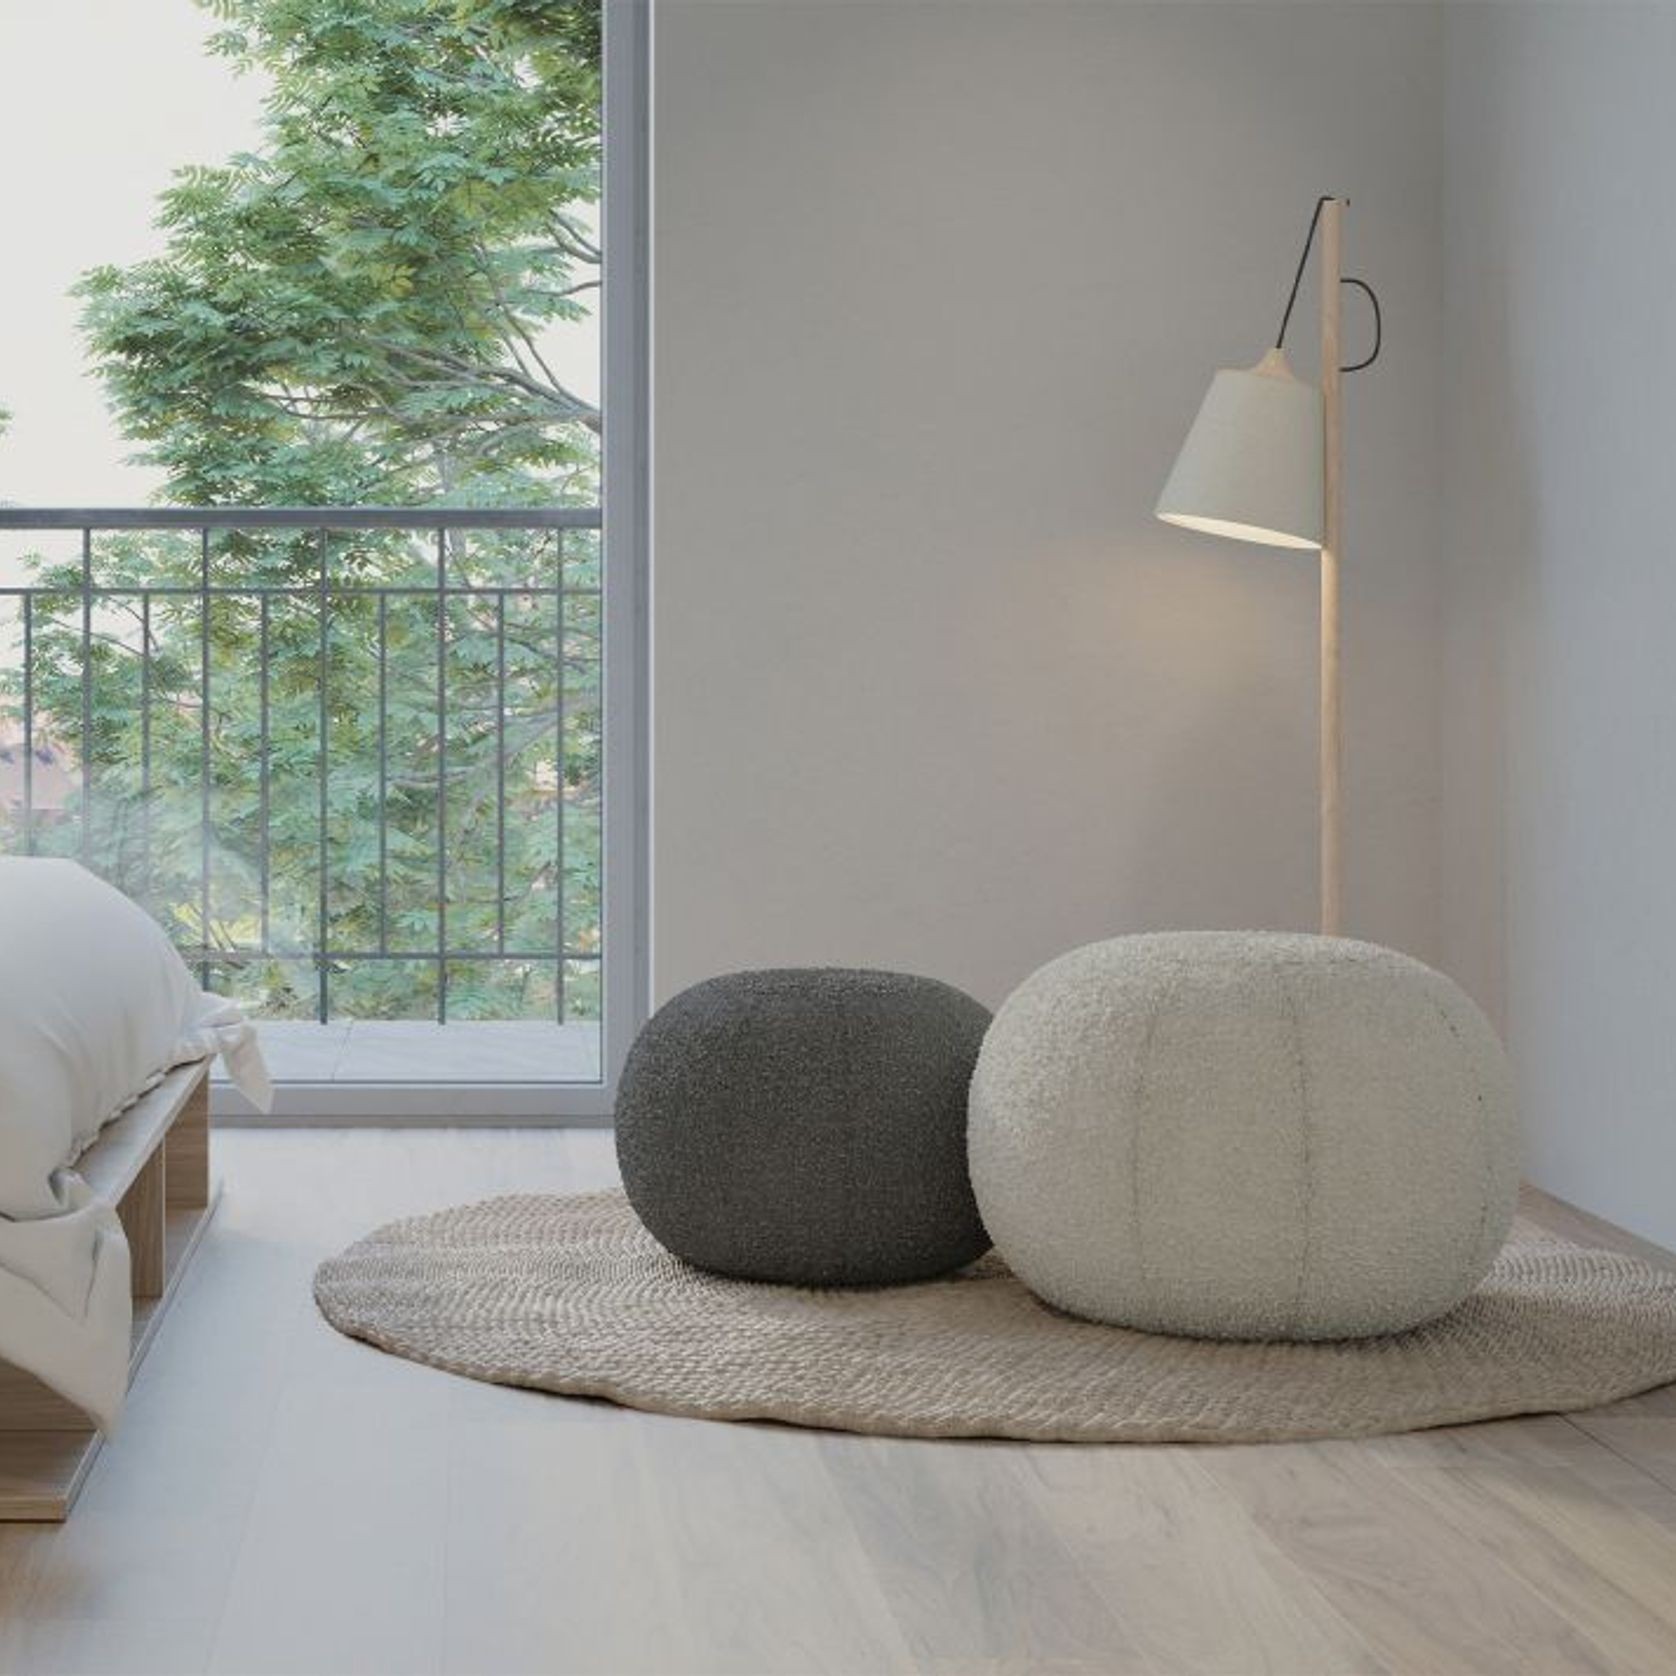 Ronde Pouf in Elephant Boucle - Small gallery detail image